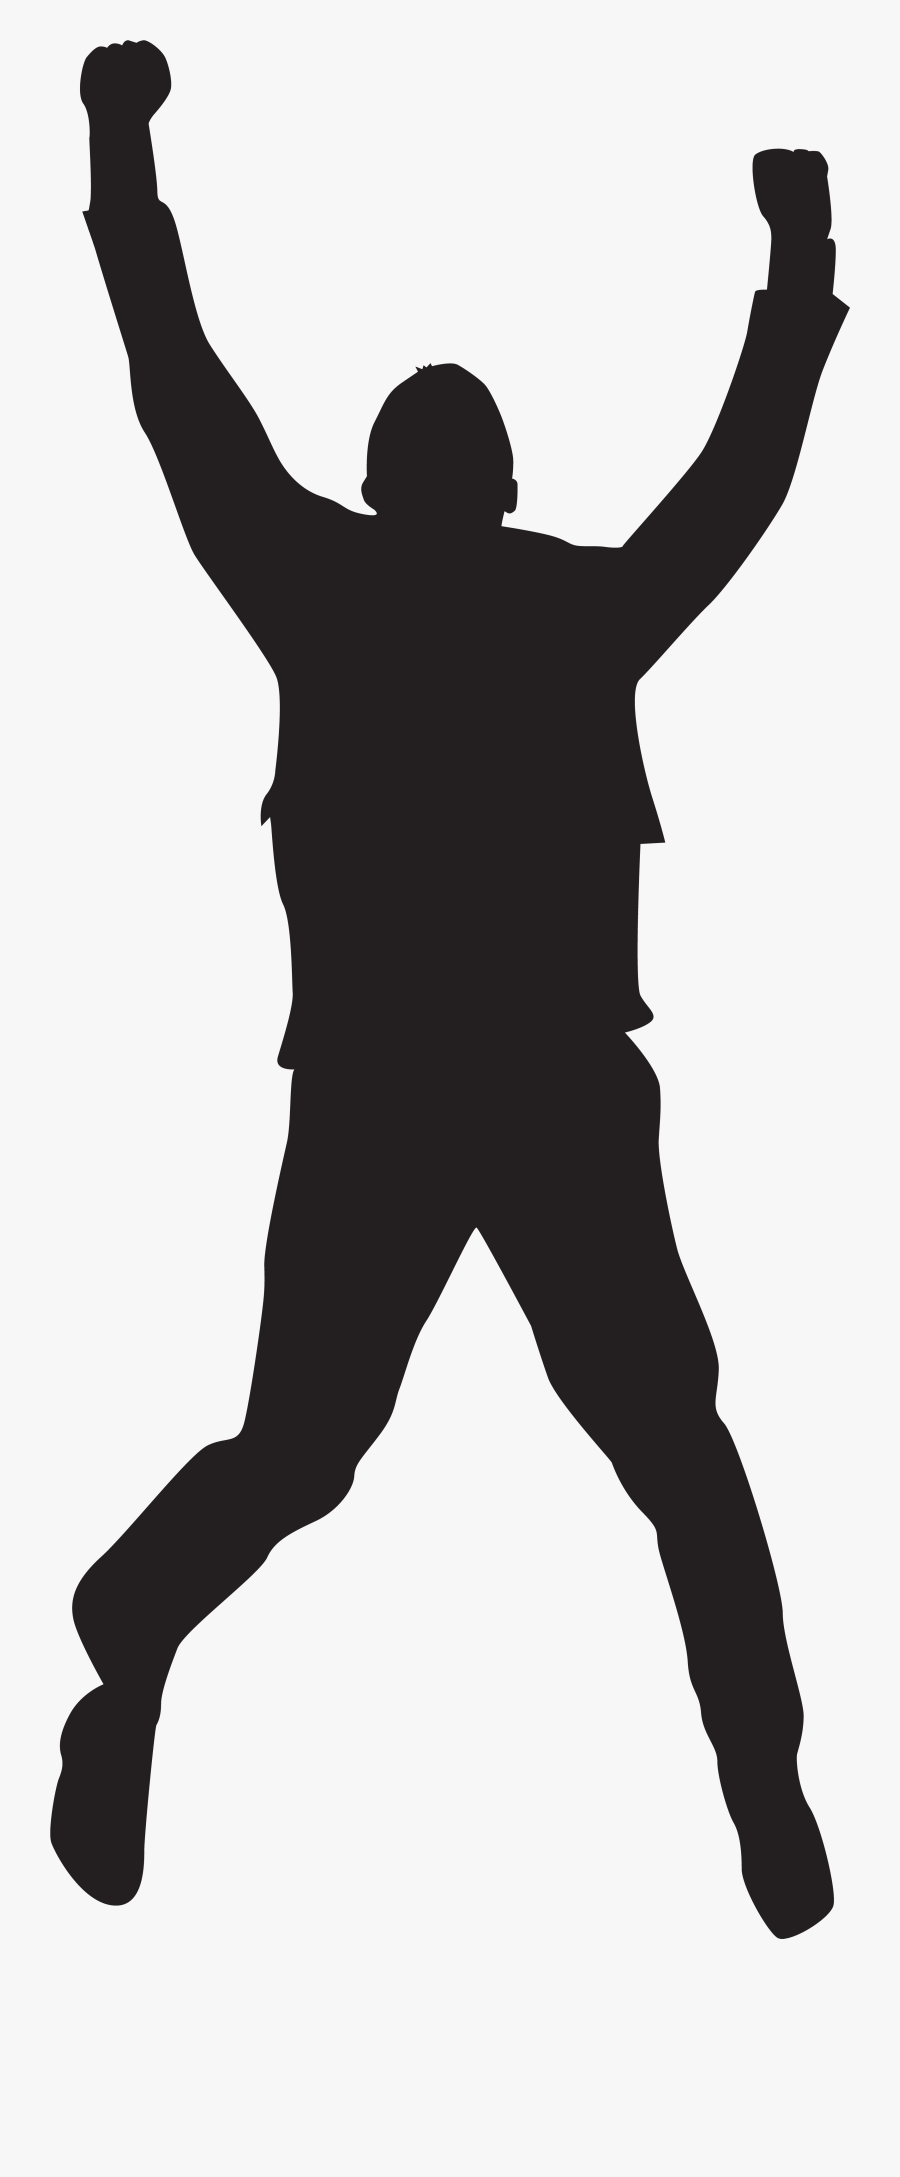 Jumping Happy Man Silhouette Png Clip Art Imageu200b - Jumping Man Silhouette Png, Transparent Clipart